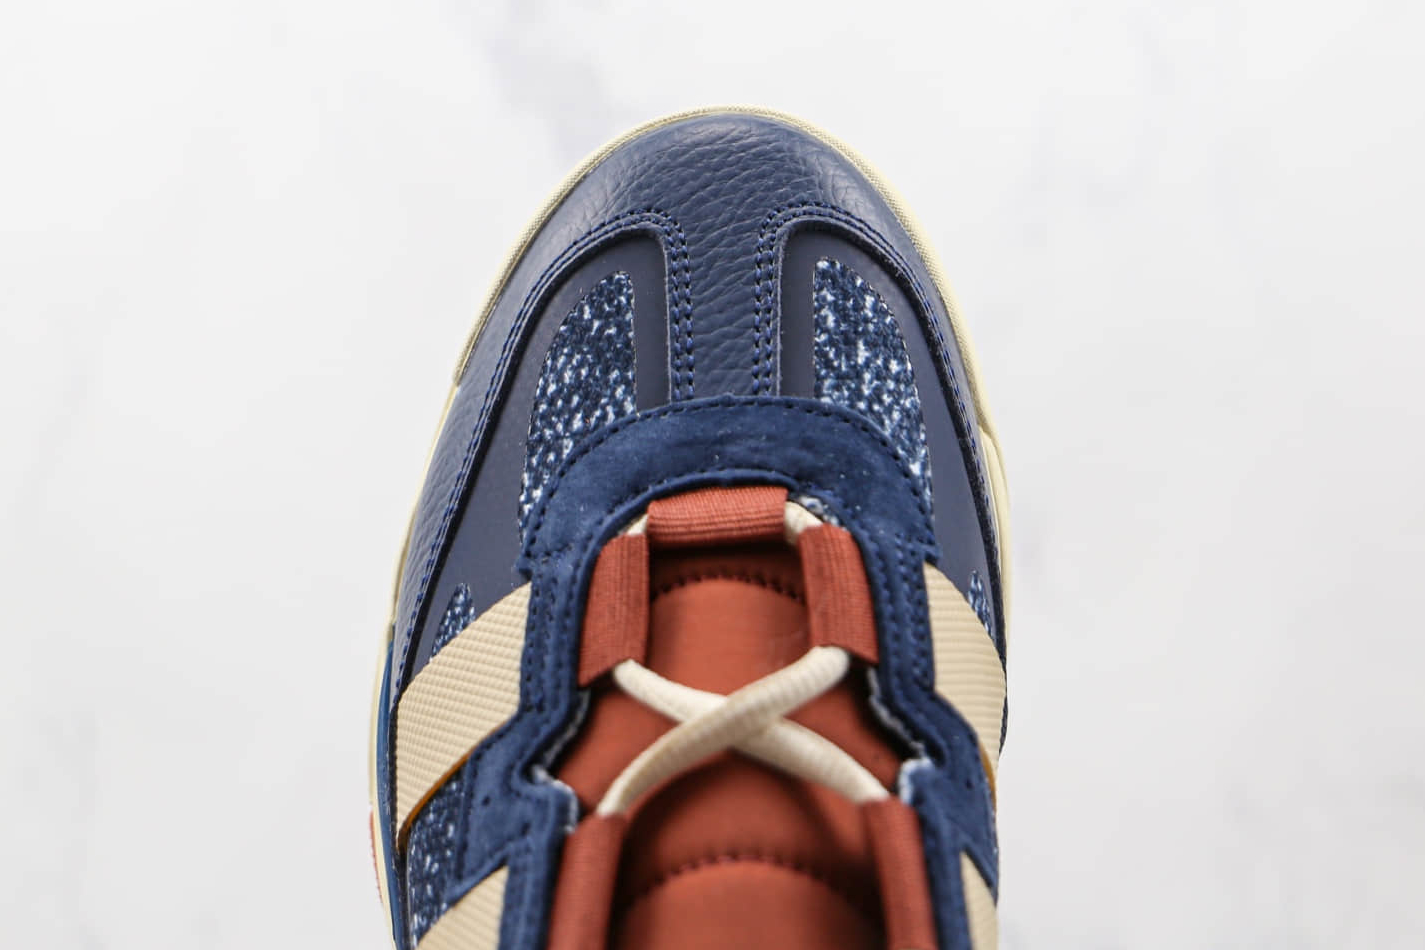 Adidas Niteball 'Crew Navy Wild Sepia' FX7650 - Sporty Style for Any Occasion